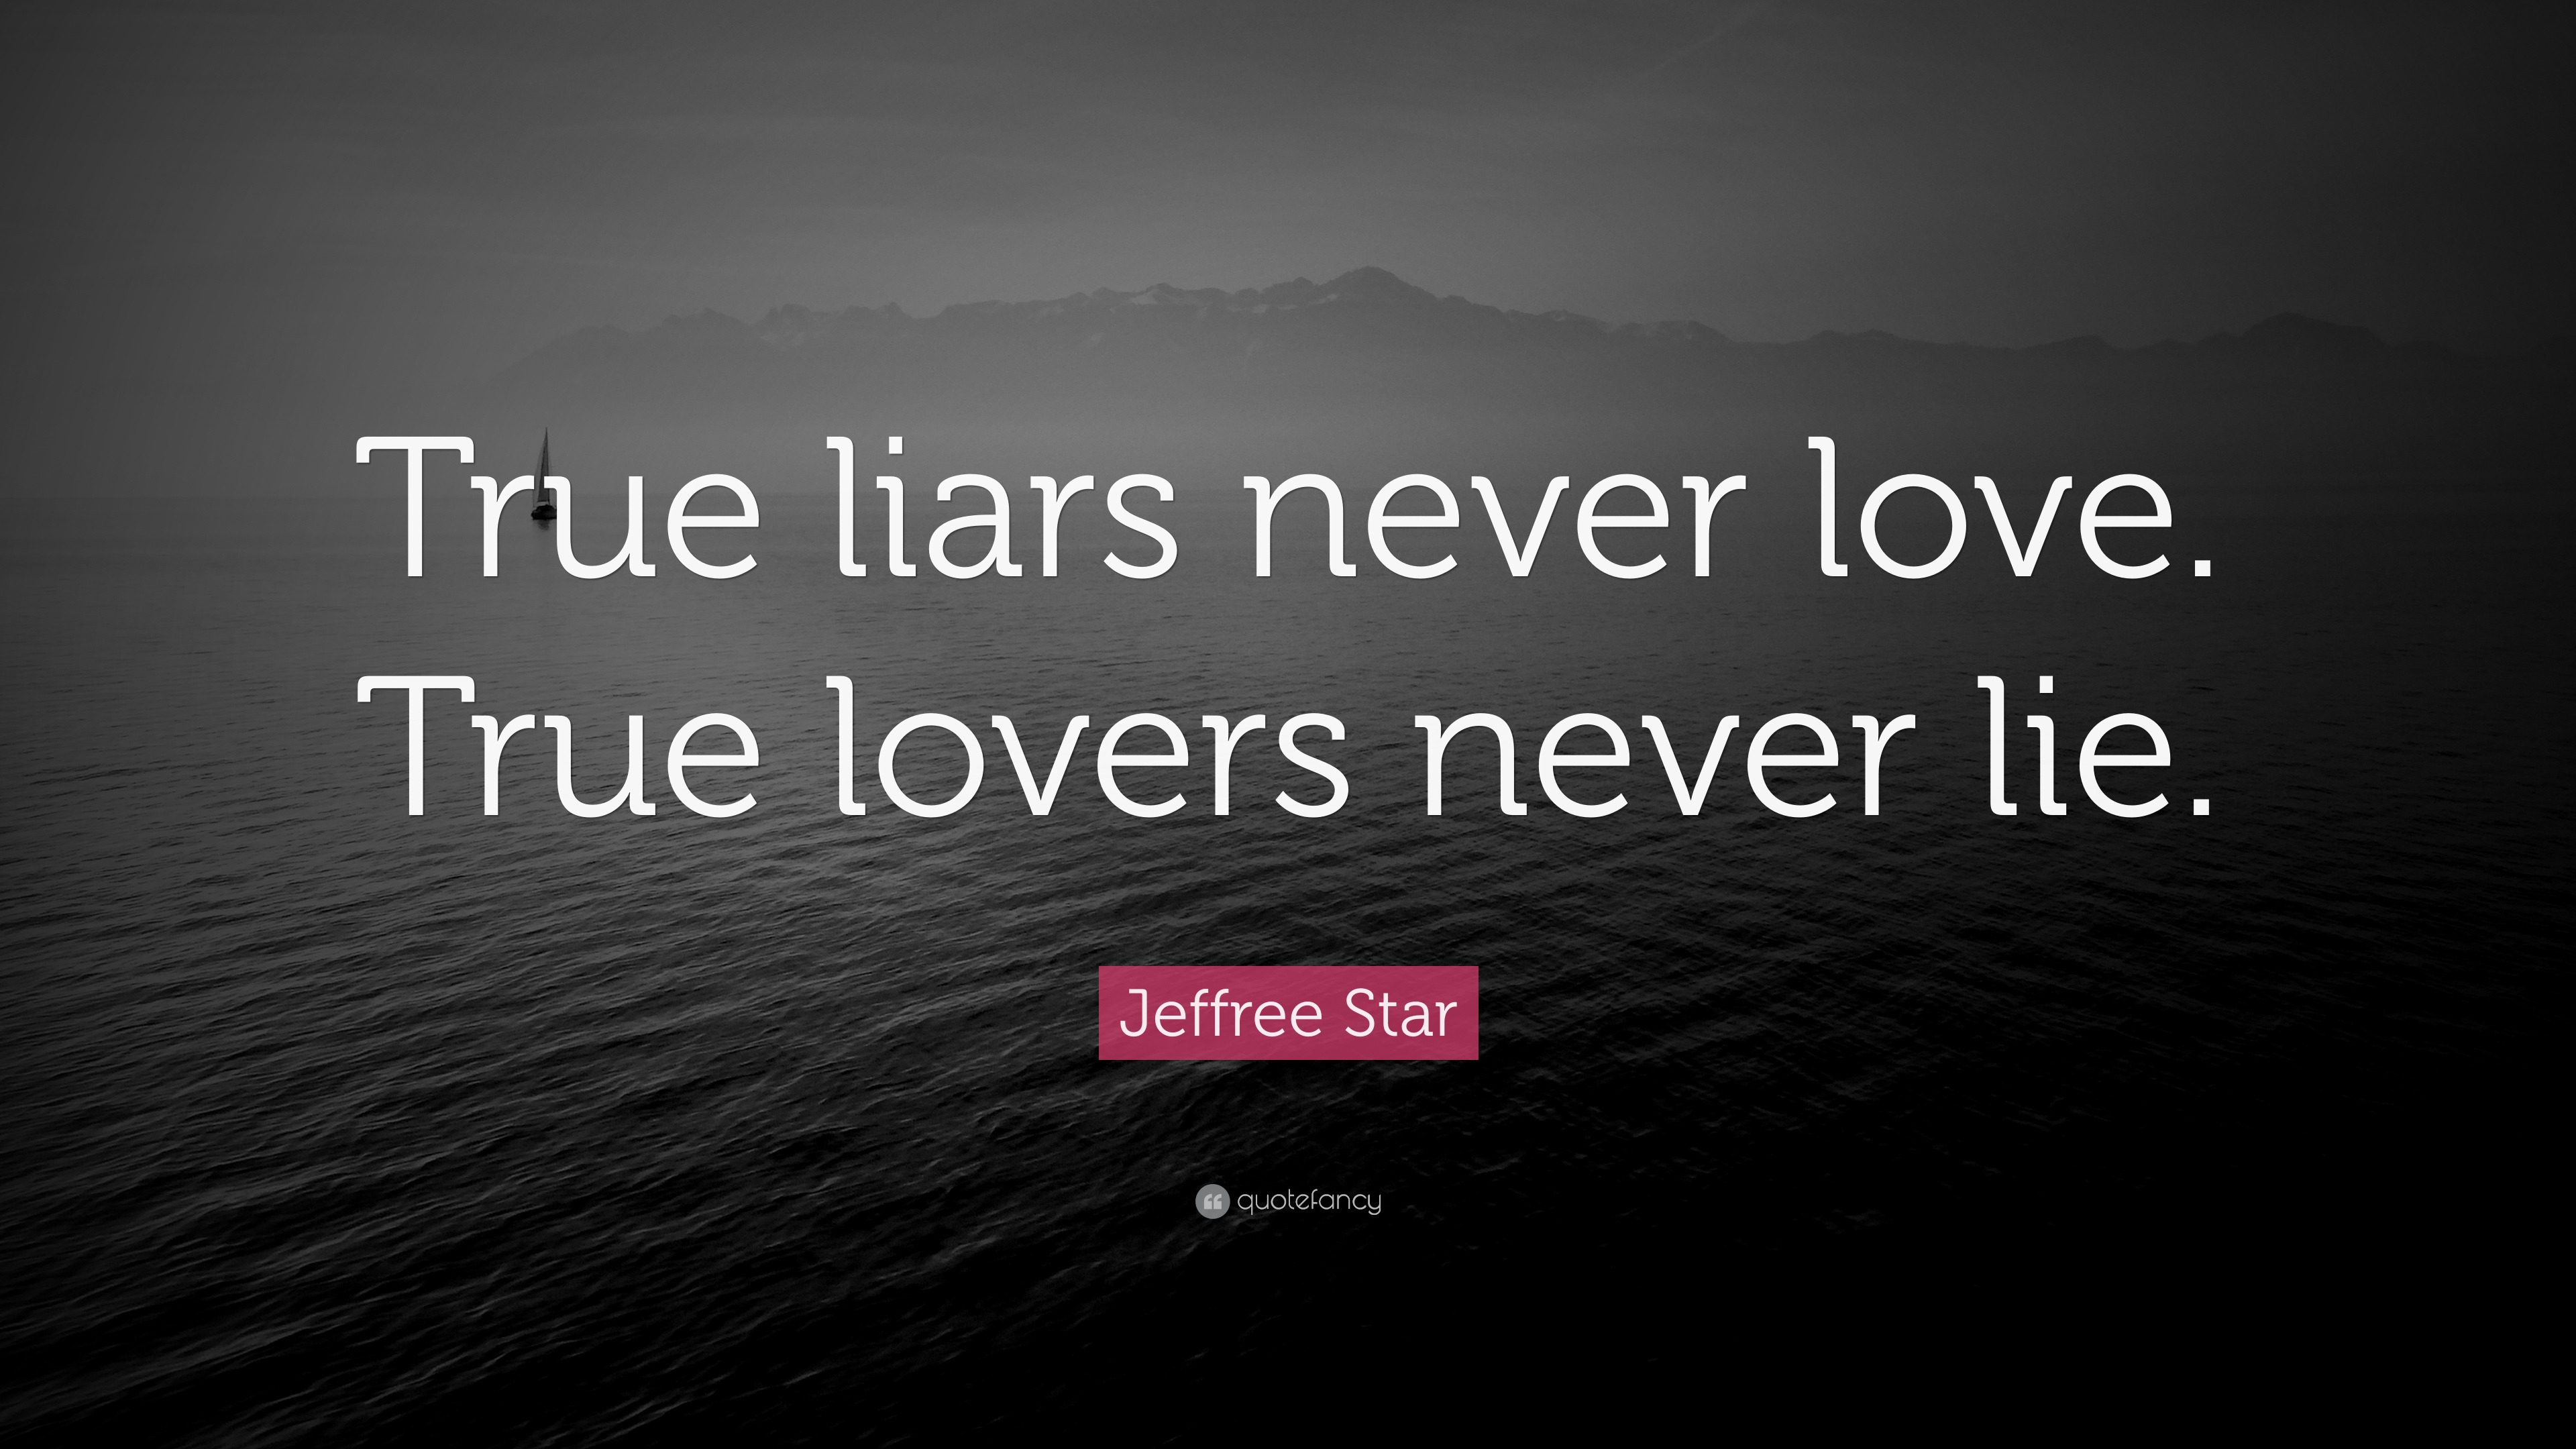 Jeffree Star Quote: "True liars never love. True lovers never lie." (9 wallpapers) - Quotefancy